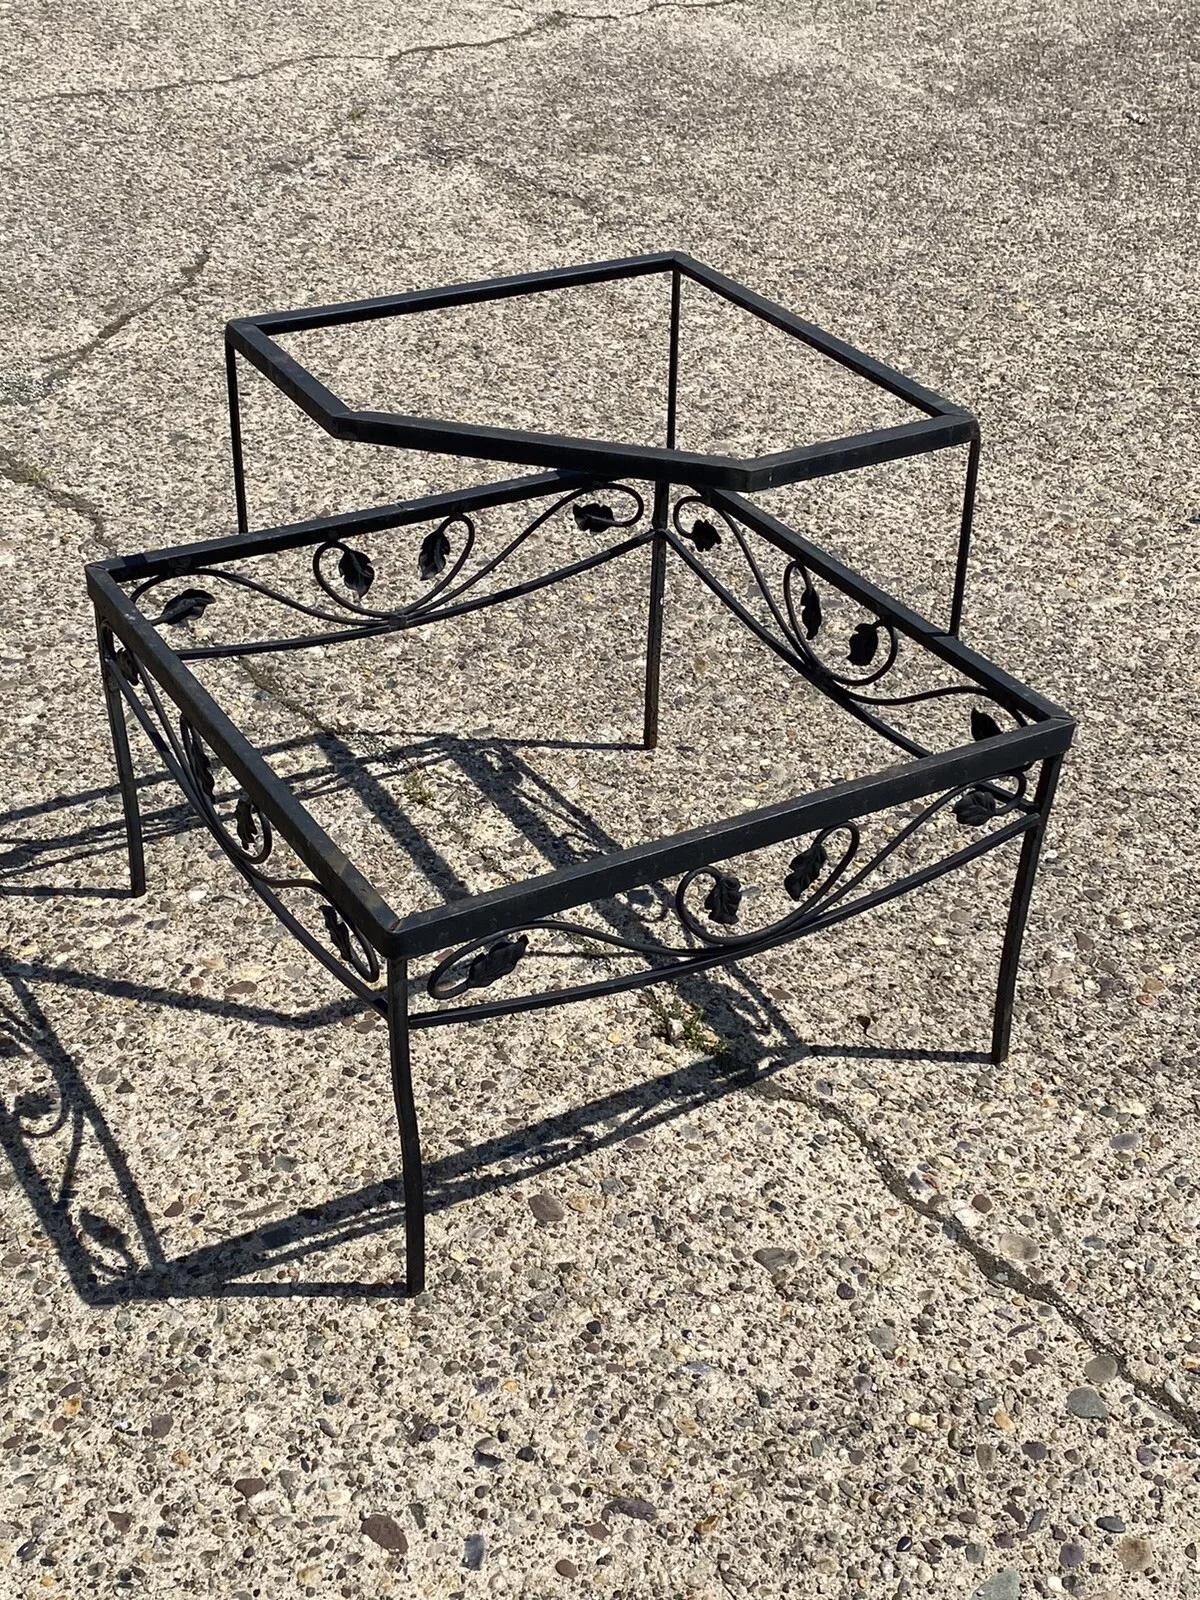 Vintage Woodard Scrolling Leaf Wrought Iron Patio Corner 2 Tier Coffee Table with NO glass. Circa Mid 20th Century. Dimensions : 22